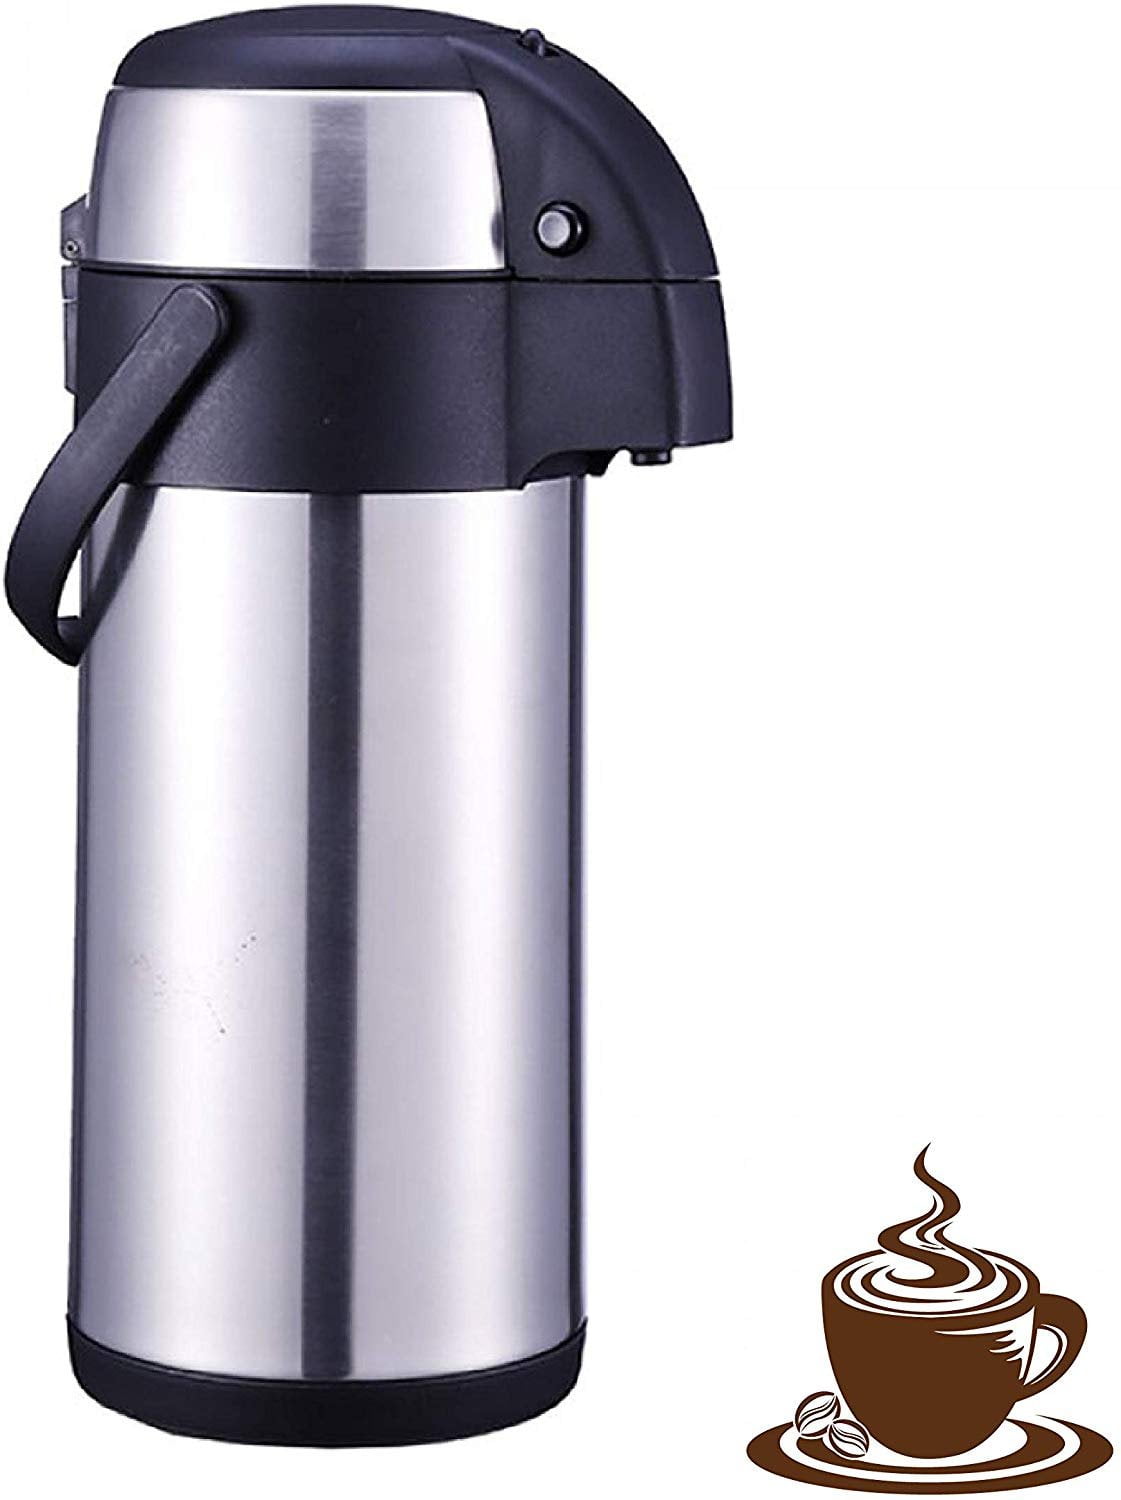  Coffee Carafe (68 Oz) - Keep water hot up to 12 Hours,  stainless steel thermos carafes, double walled Large Insulated Vacuum  flask, Beverage Dispenser By Vondior: Home & Kitchen